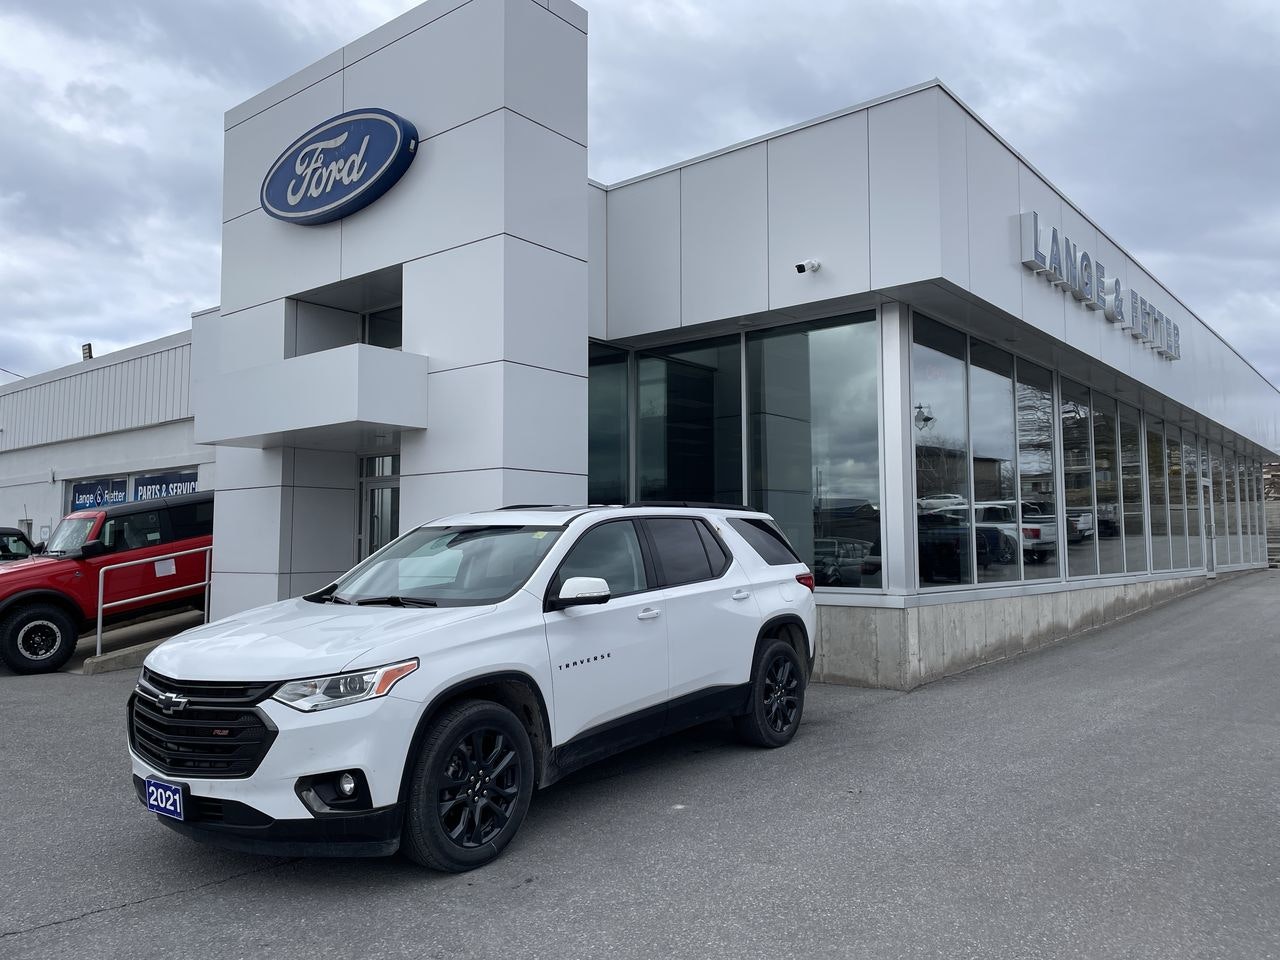 2021 Chevrolet Traverse - 21525A Full Image 1